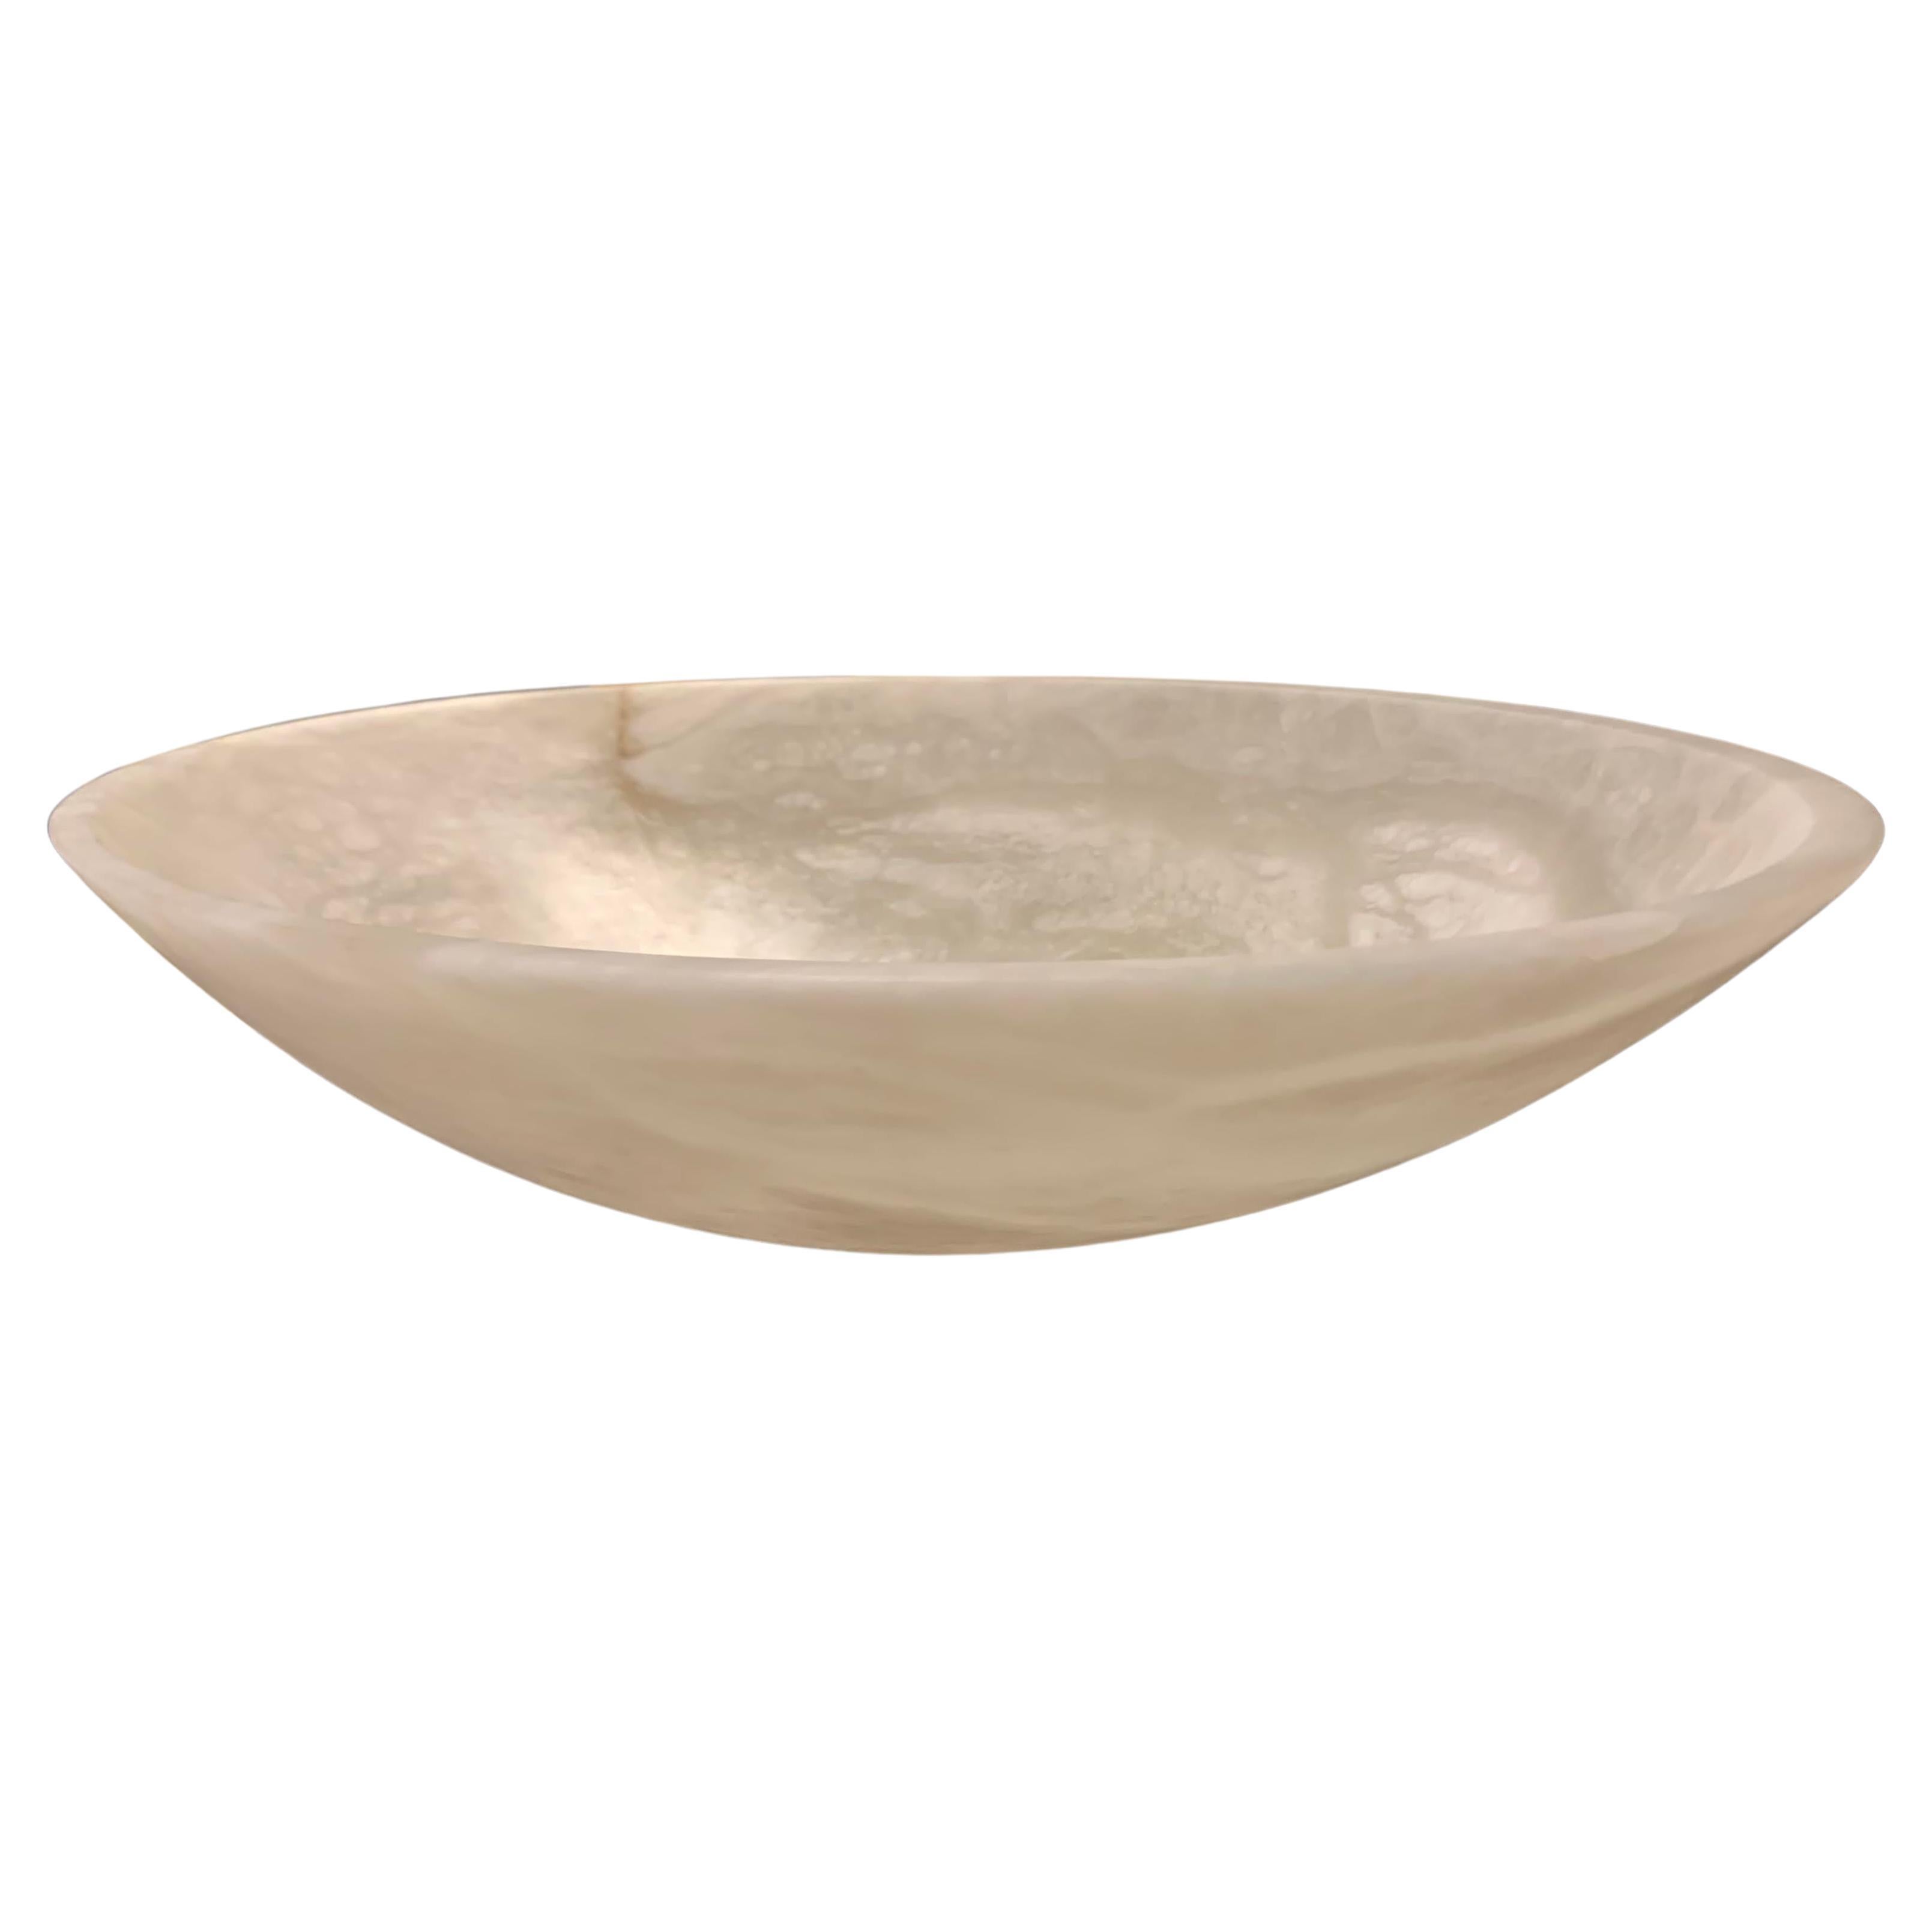 White Alabaster Large Oval Shaped Bowl, Italy, Contemporary